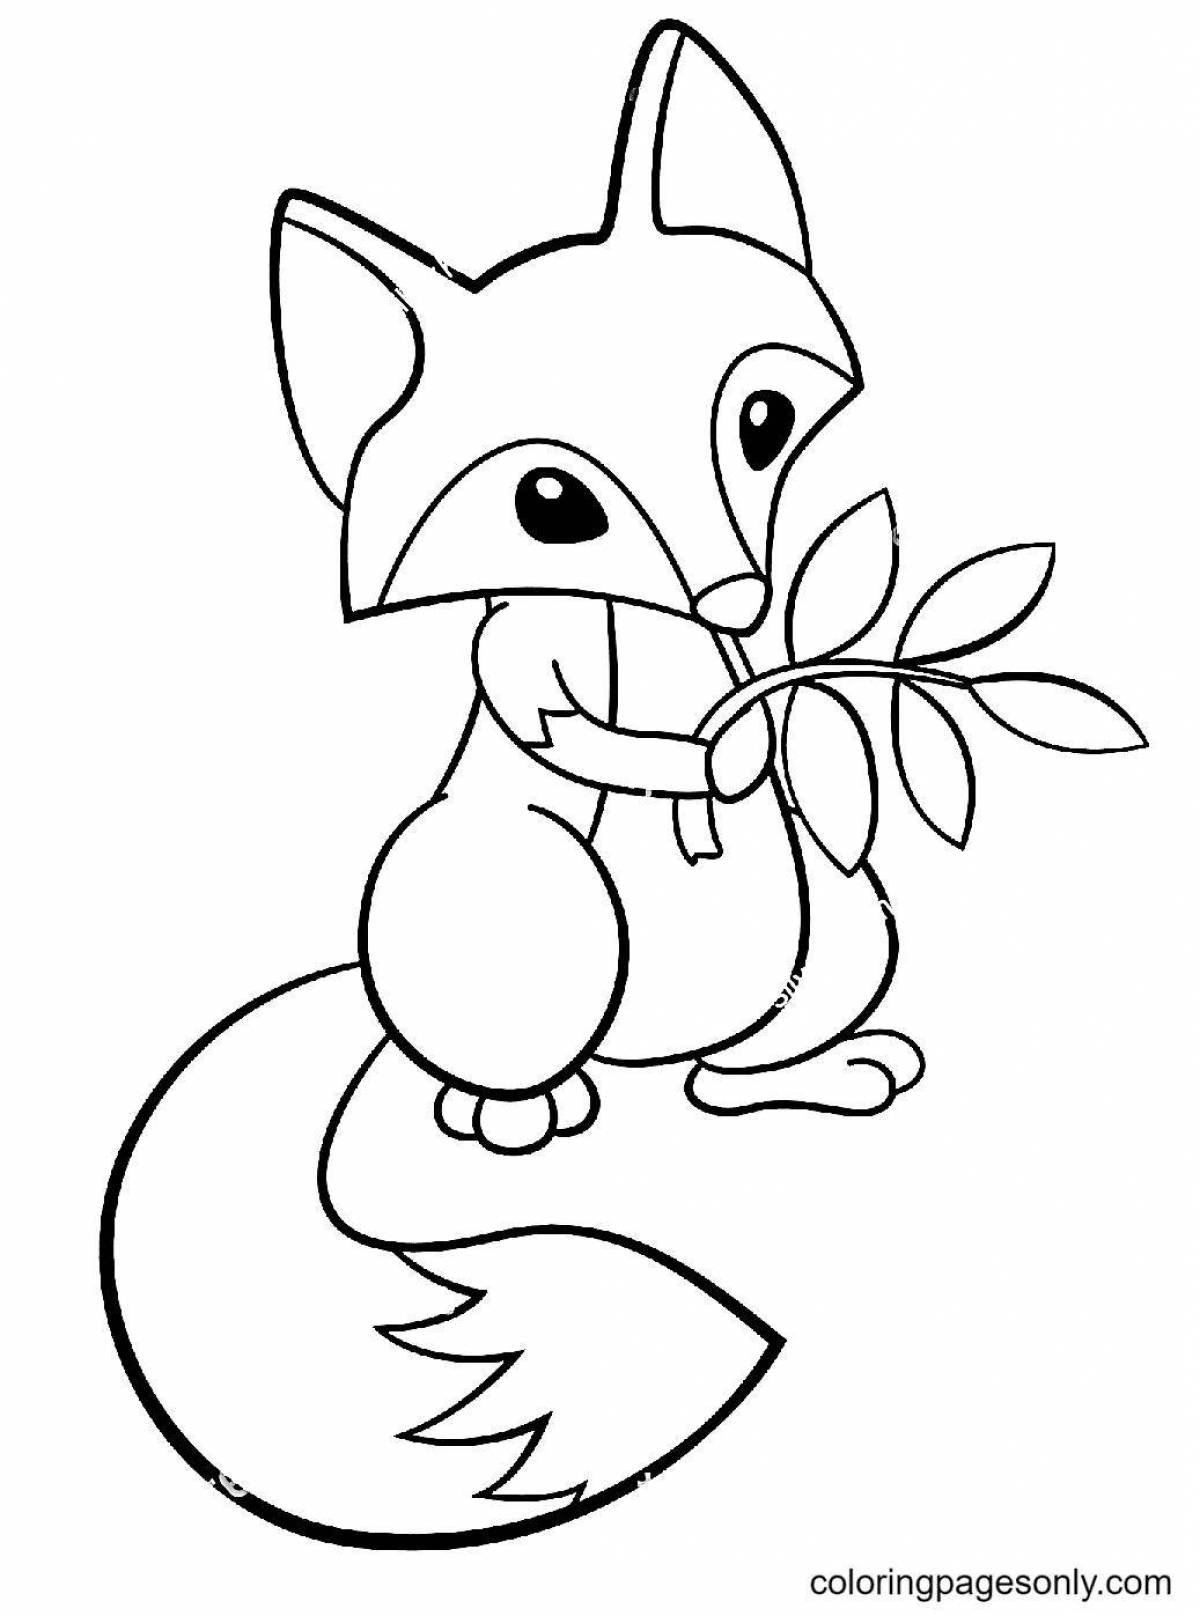 Adorable fox coloring book for kids 6-7 years old